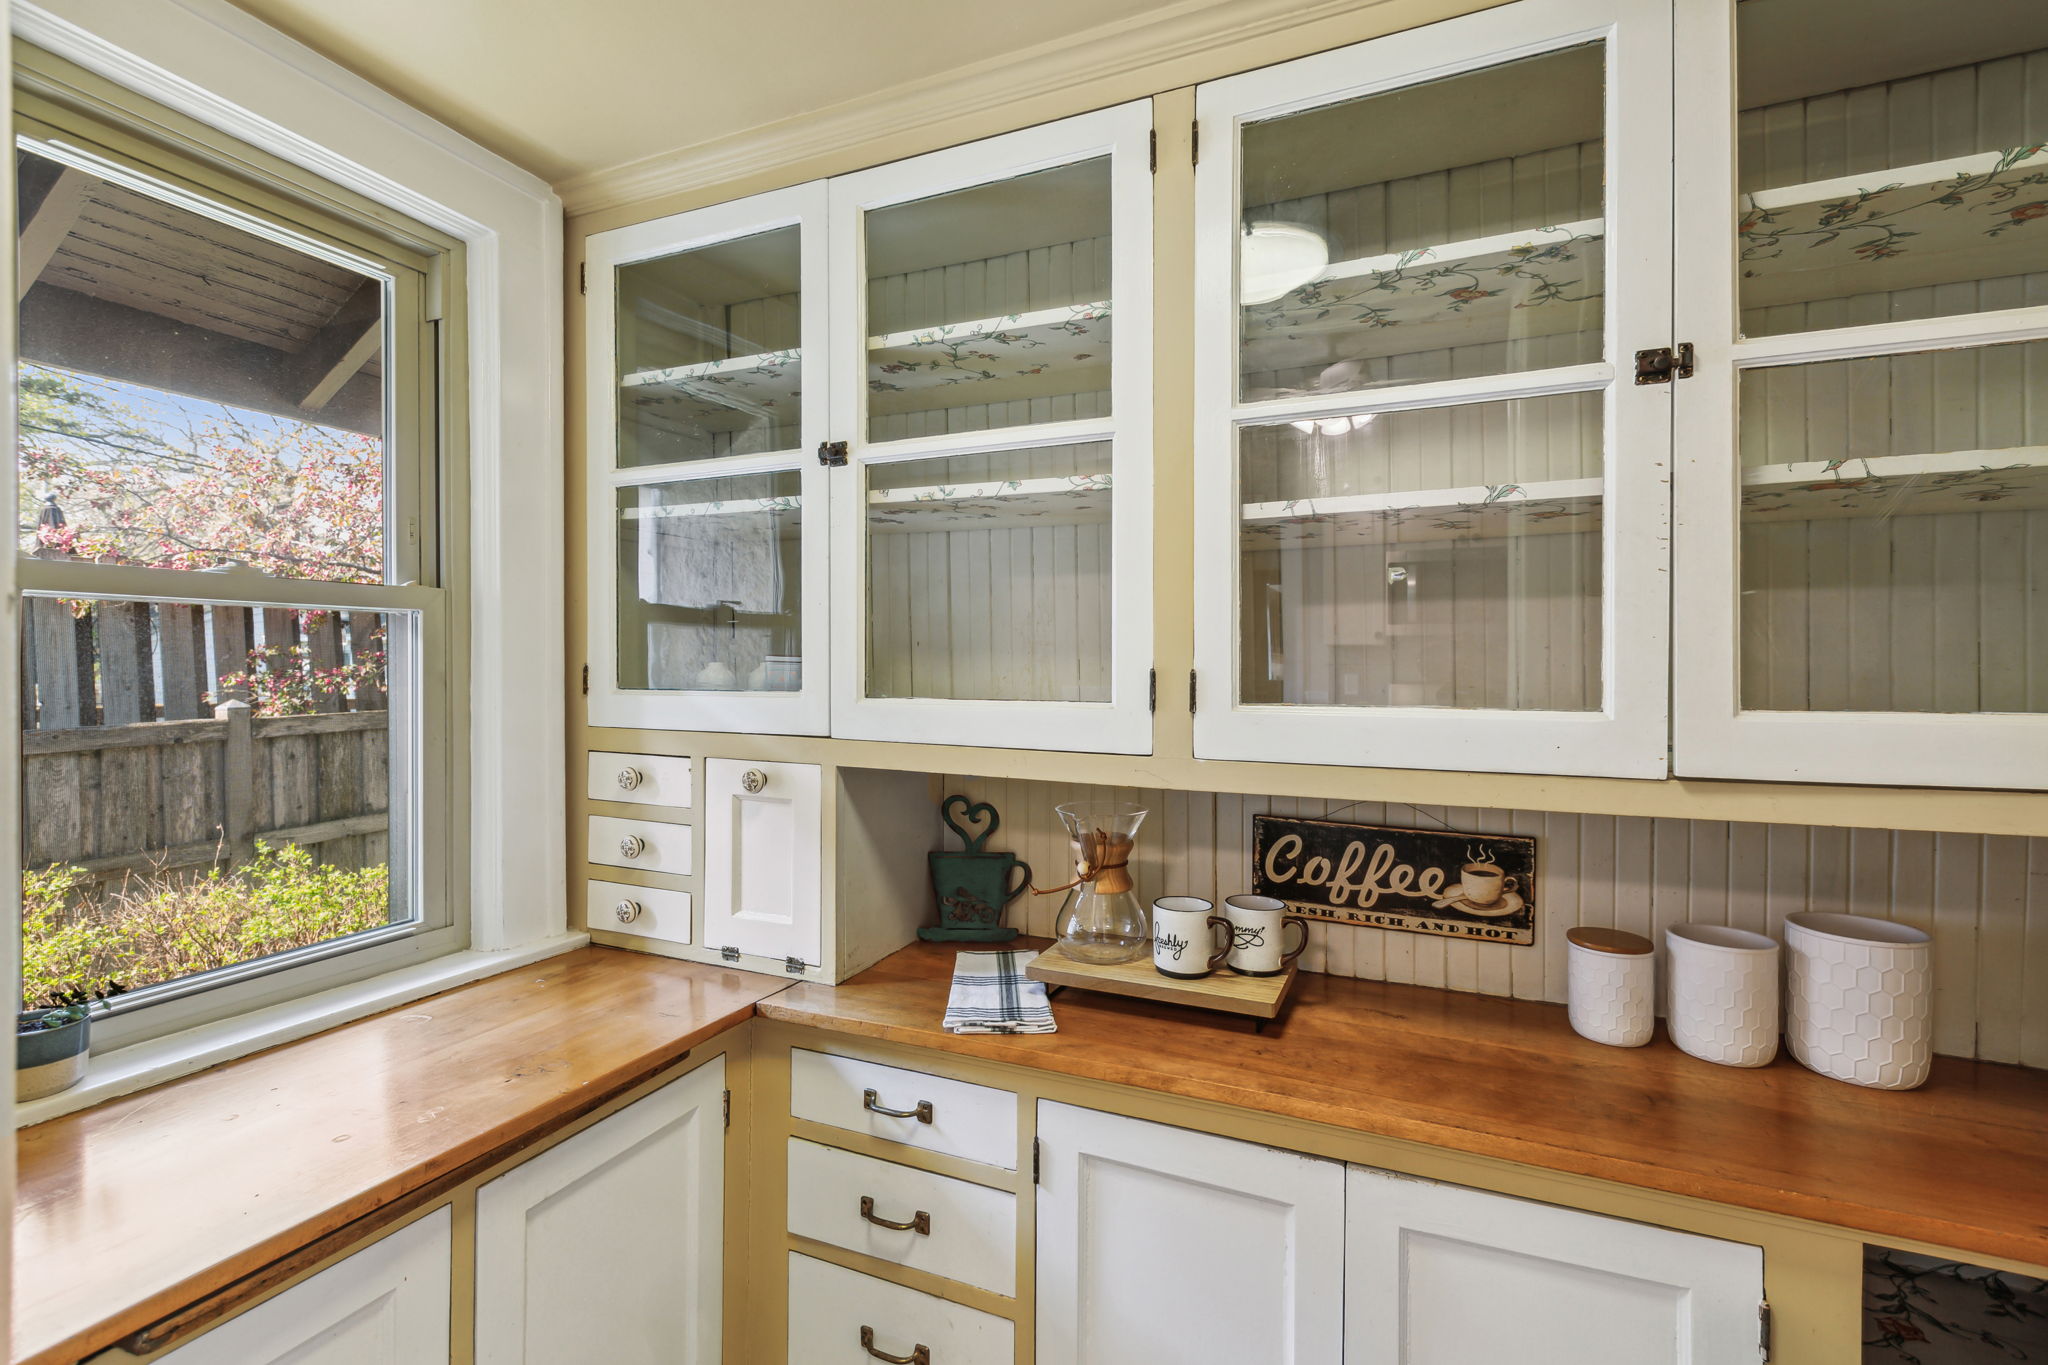 Original Walk-in Pantry gives more counter space.